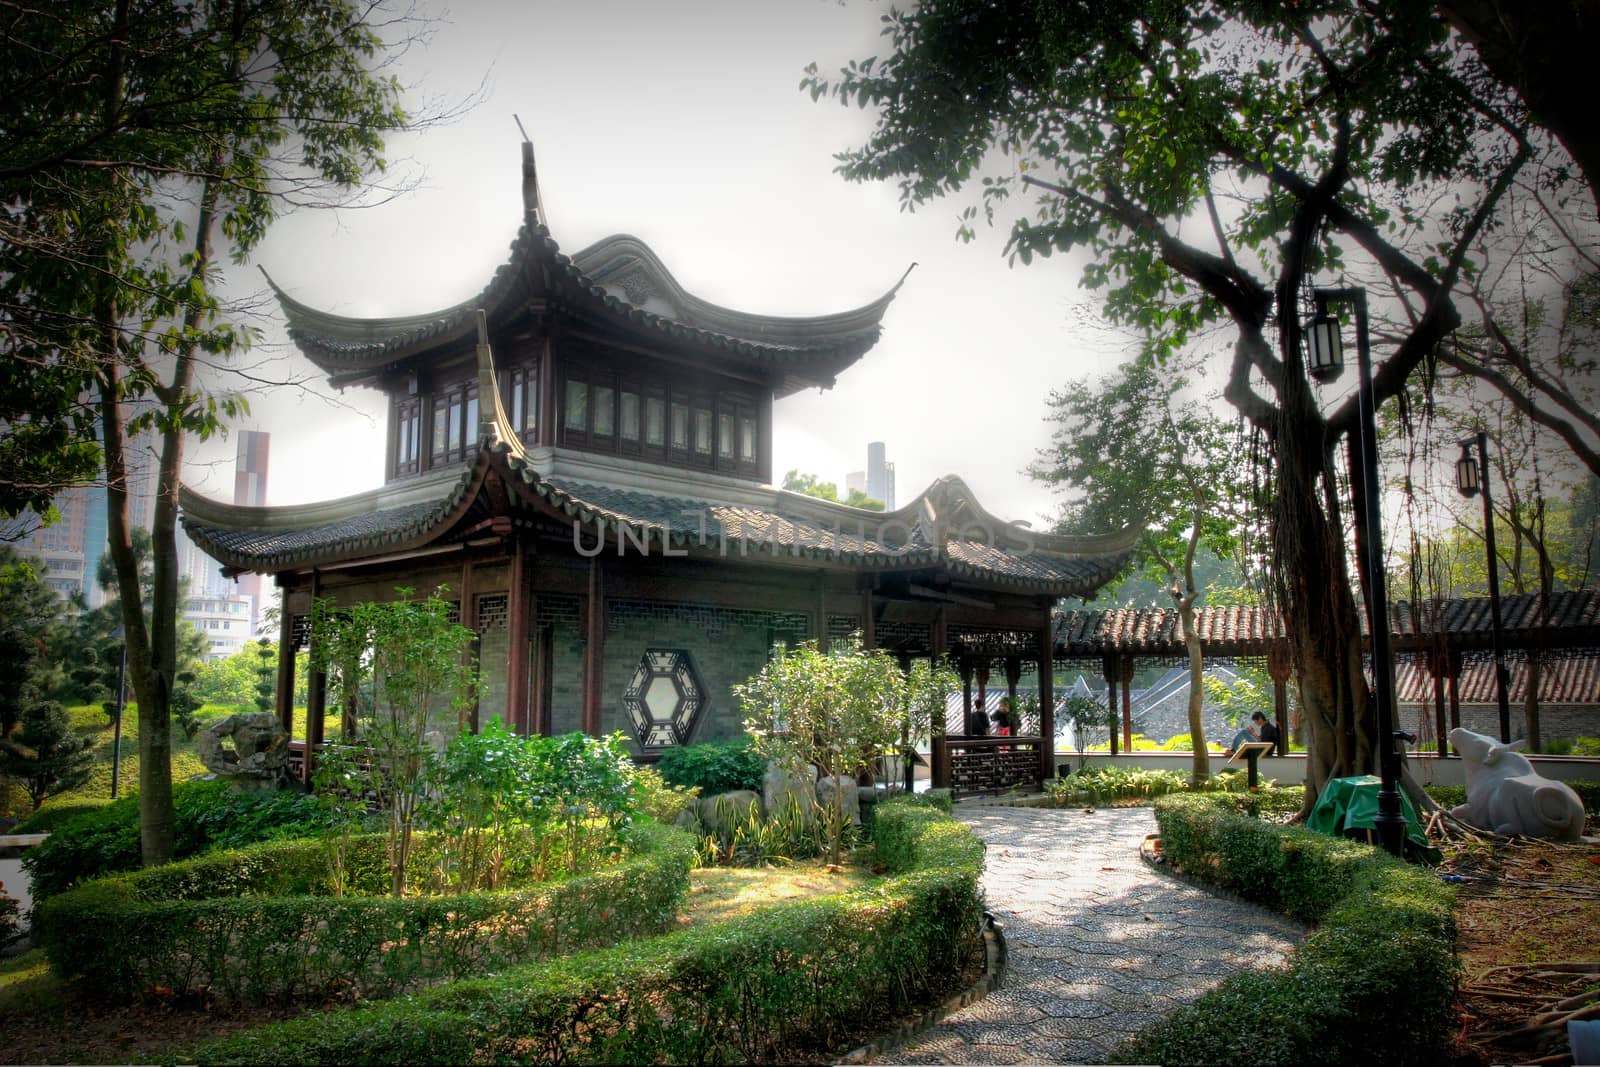 Chinese architecture in the park (Hong Kong, China)